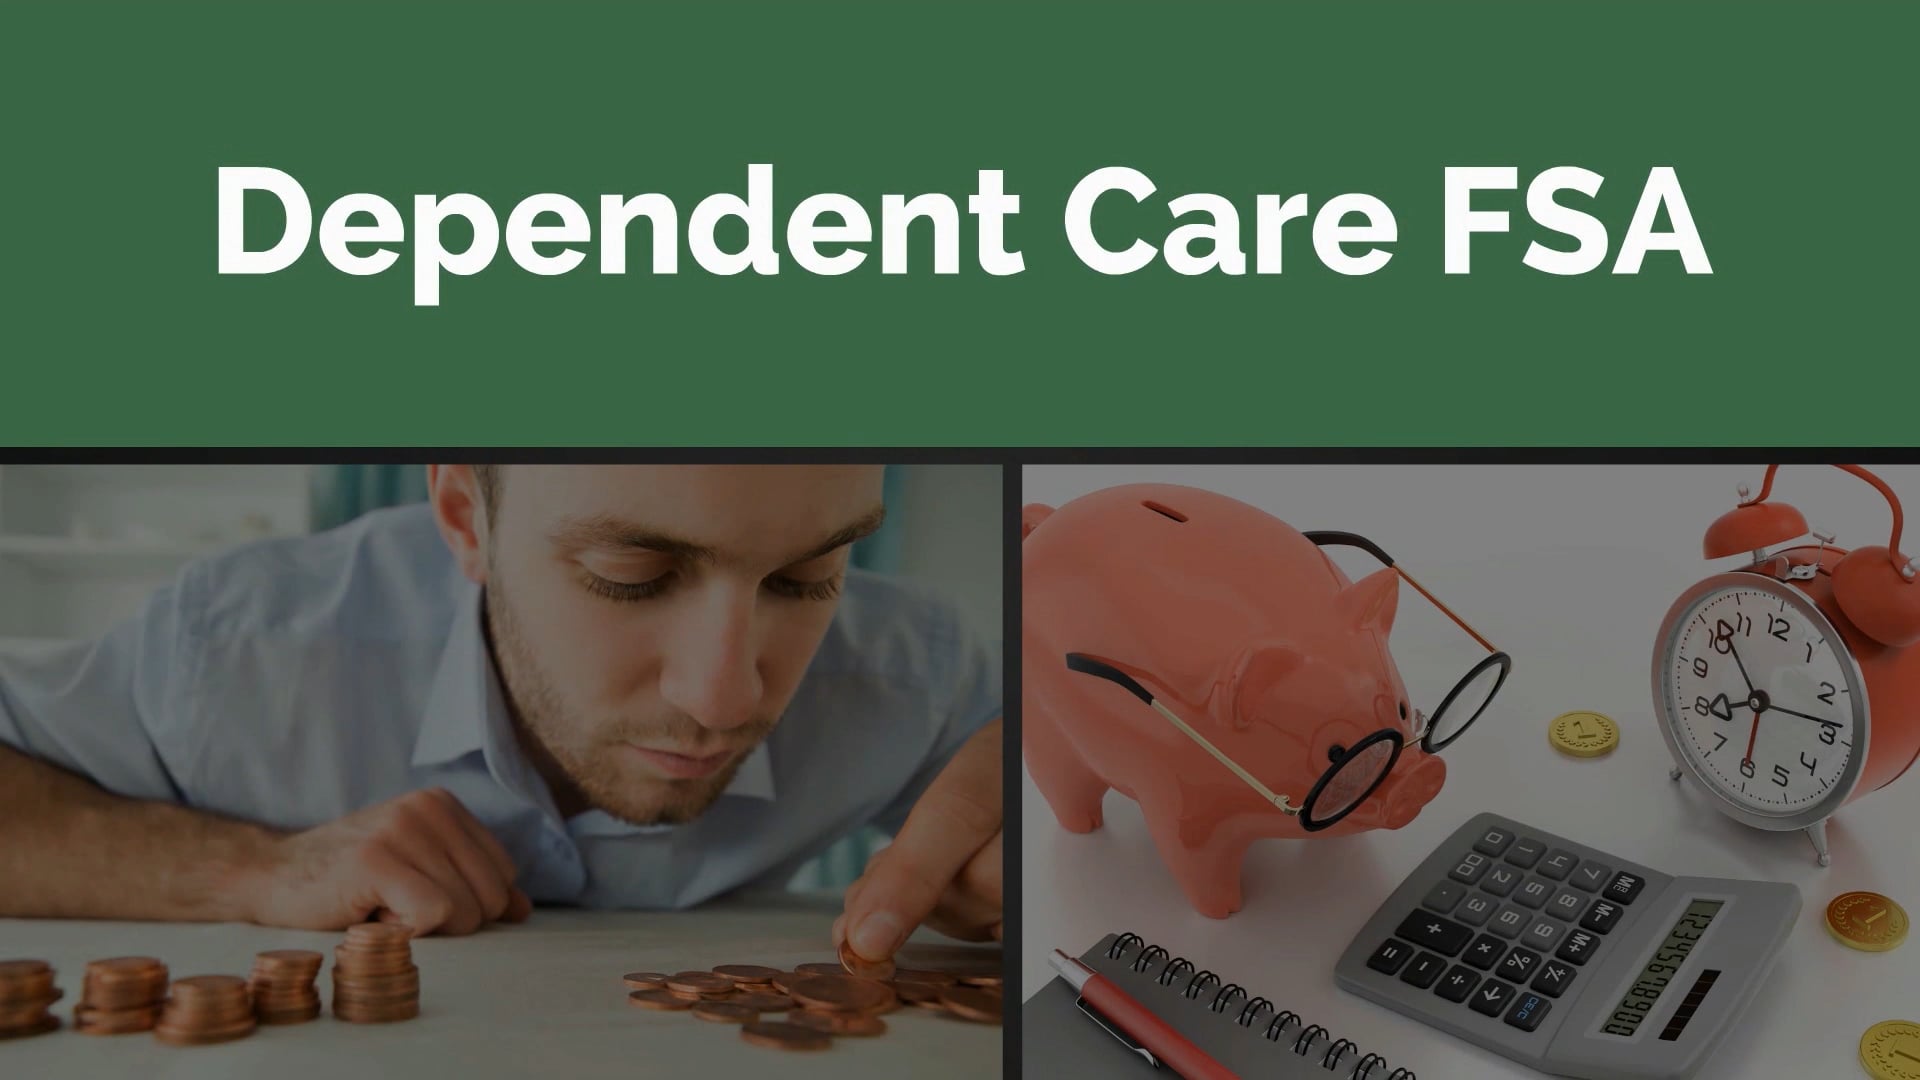 Benefits Video Library Dependent Care FSA on Vimeo